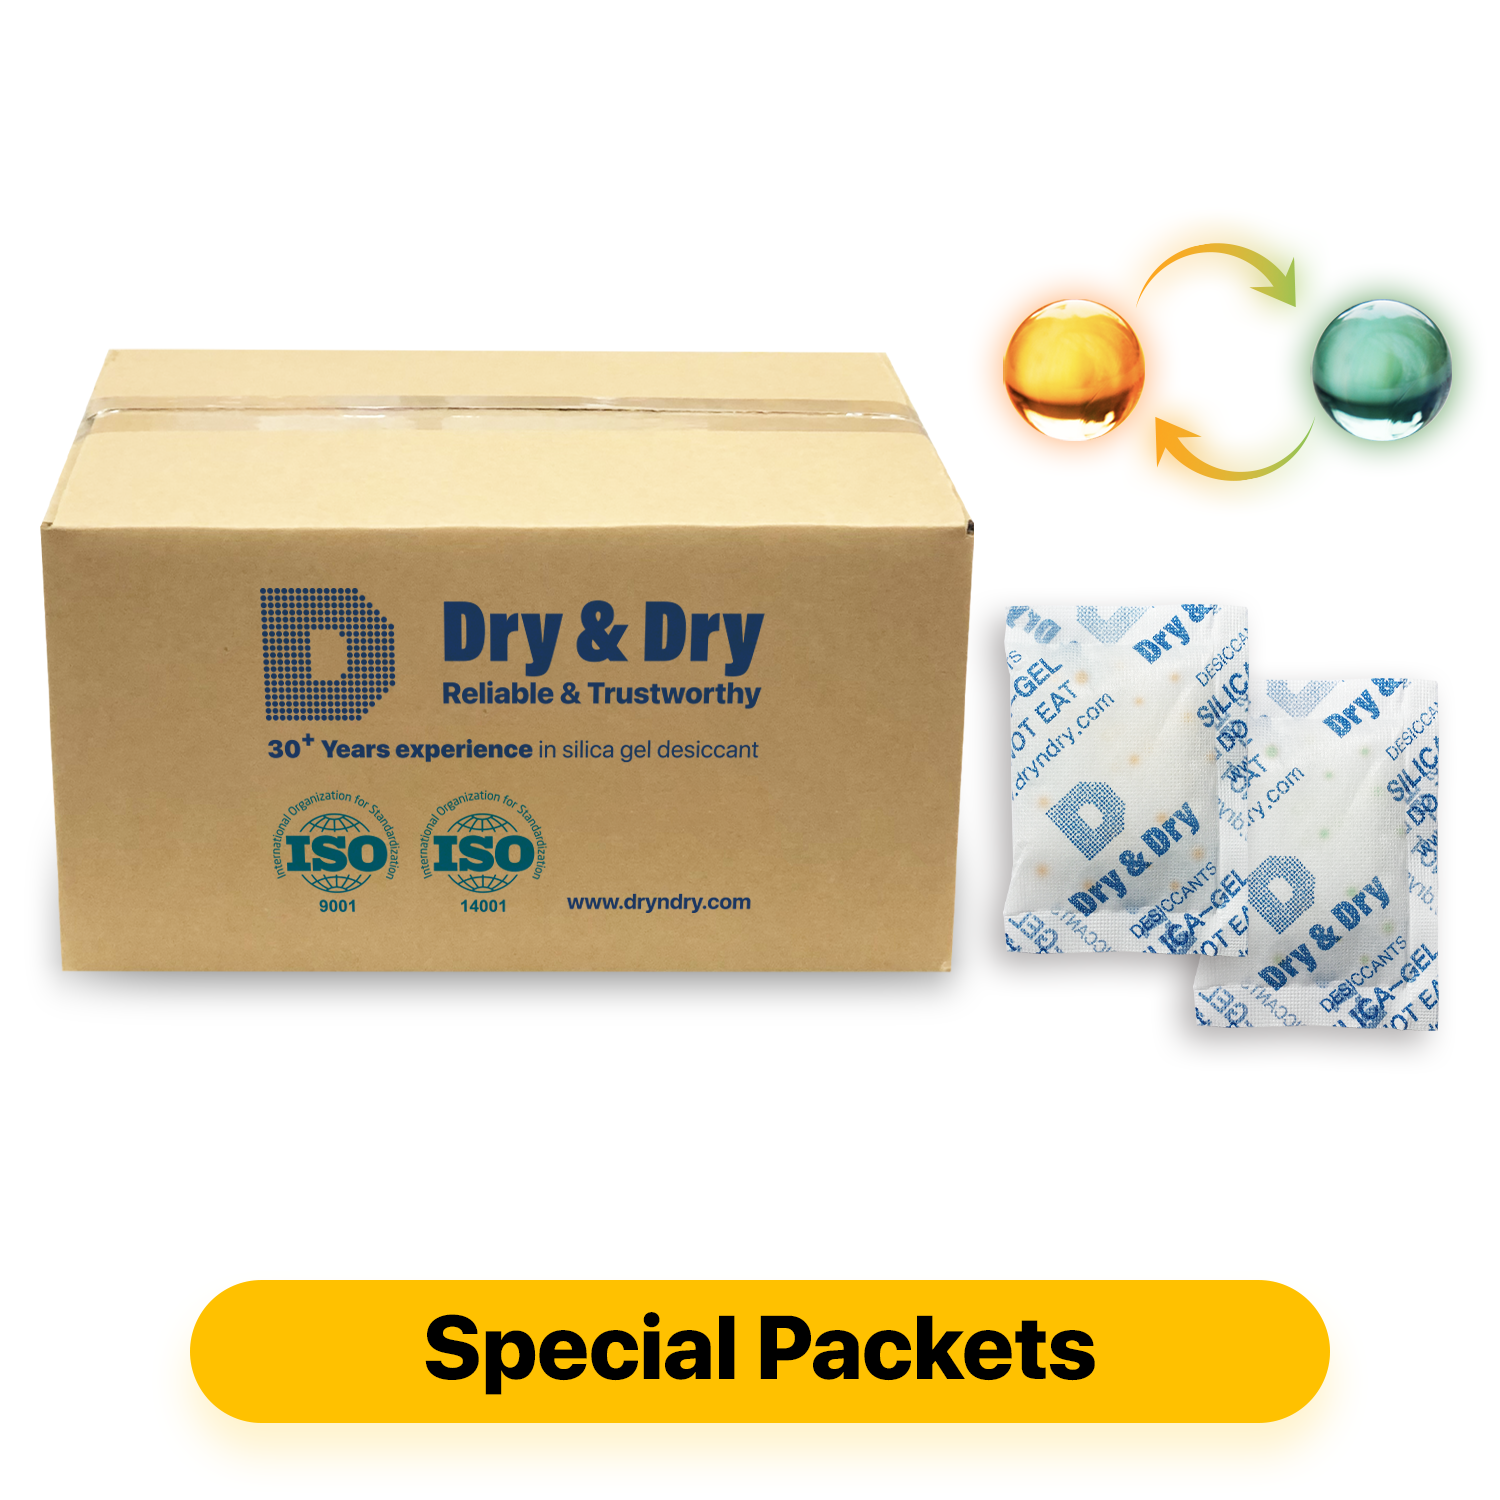 20 Gram [800 Packs] "Dry & Dry" SPECIAL Food Safe Orange Indicating(Orange to Dark Green) Mixed Silica Gel Packets - Rechargeable(FDA Compliant)